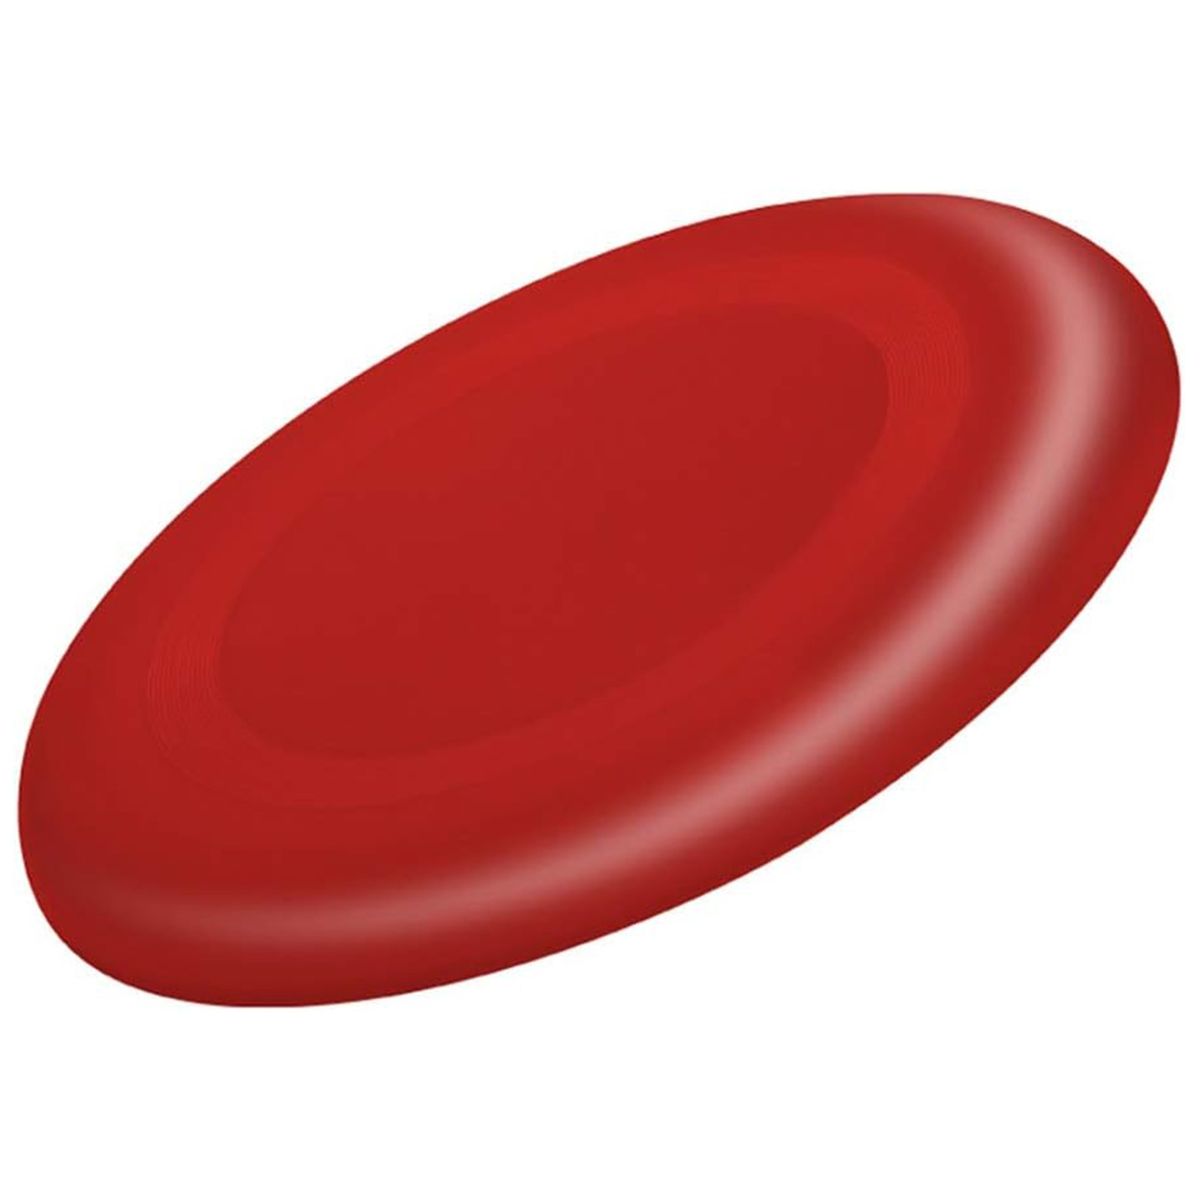 Frisbee Outdoor Sport Toy -Red/White